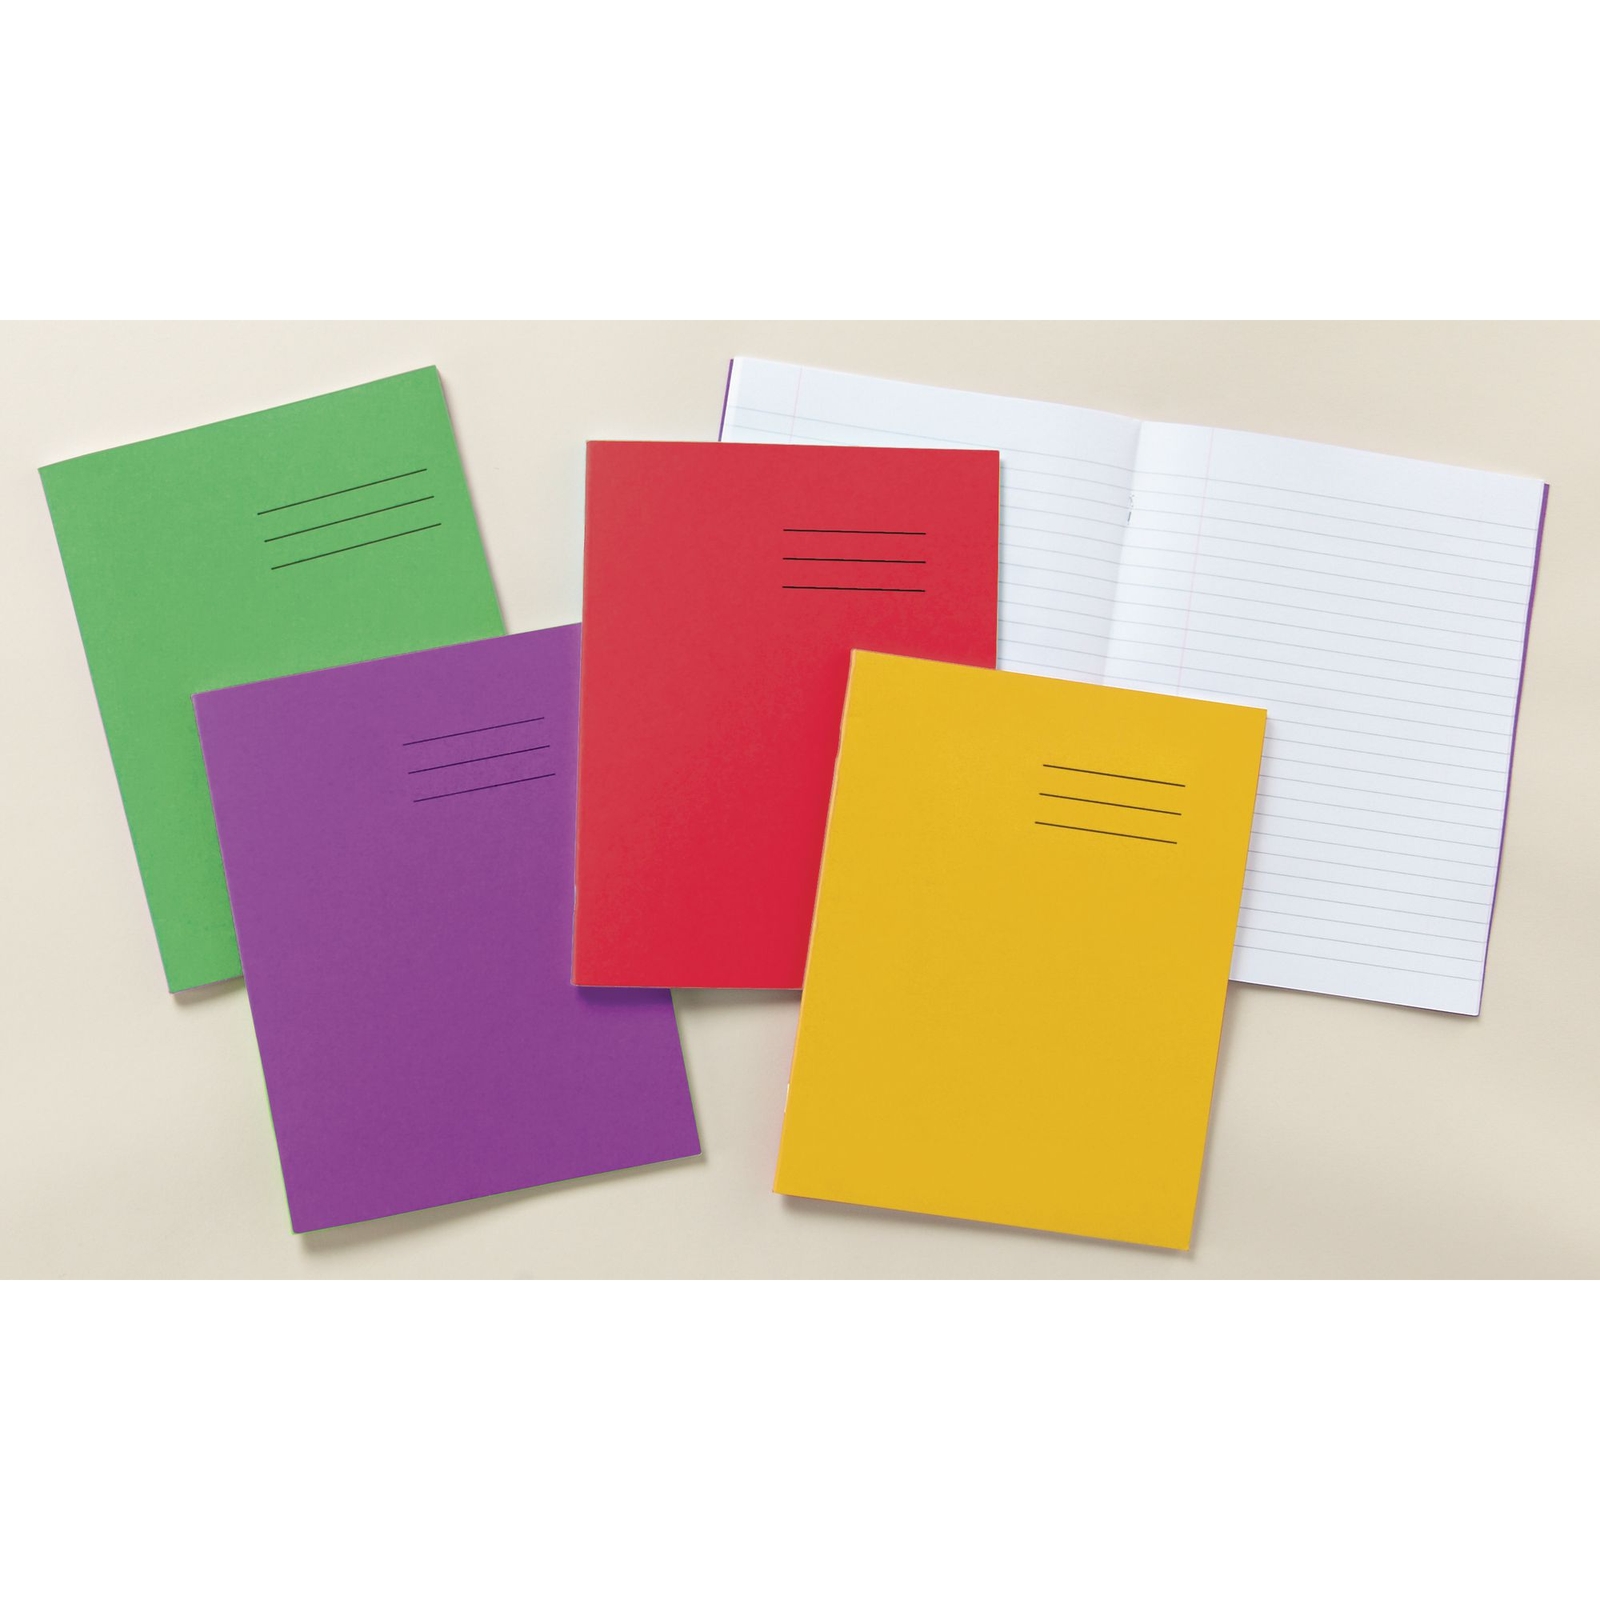 Classmates Yellow A4 Exercise Book 64-Page, 8mm Ruled With Margin - Pack of 50